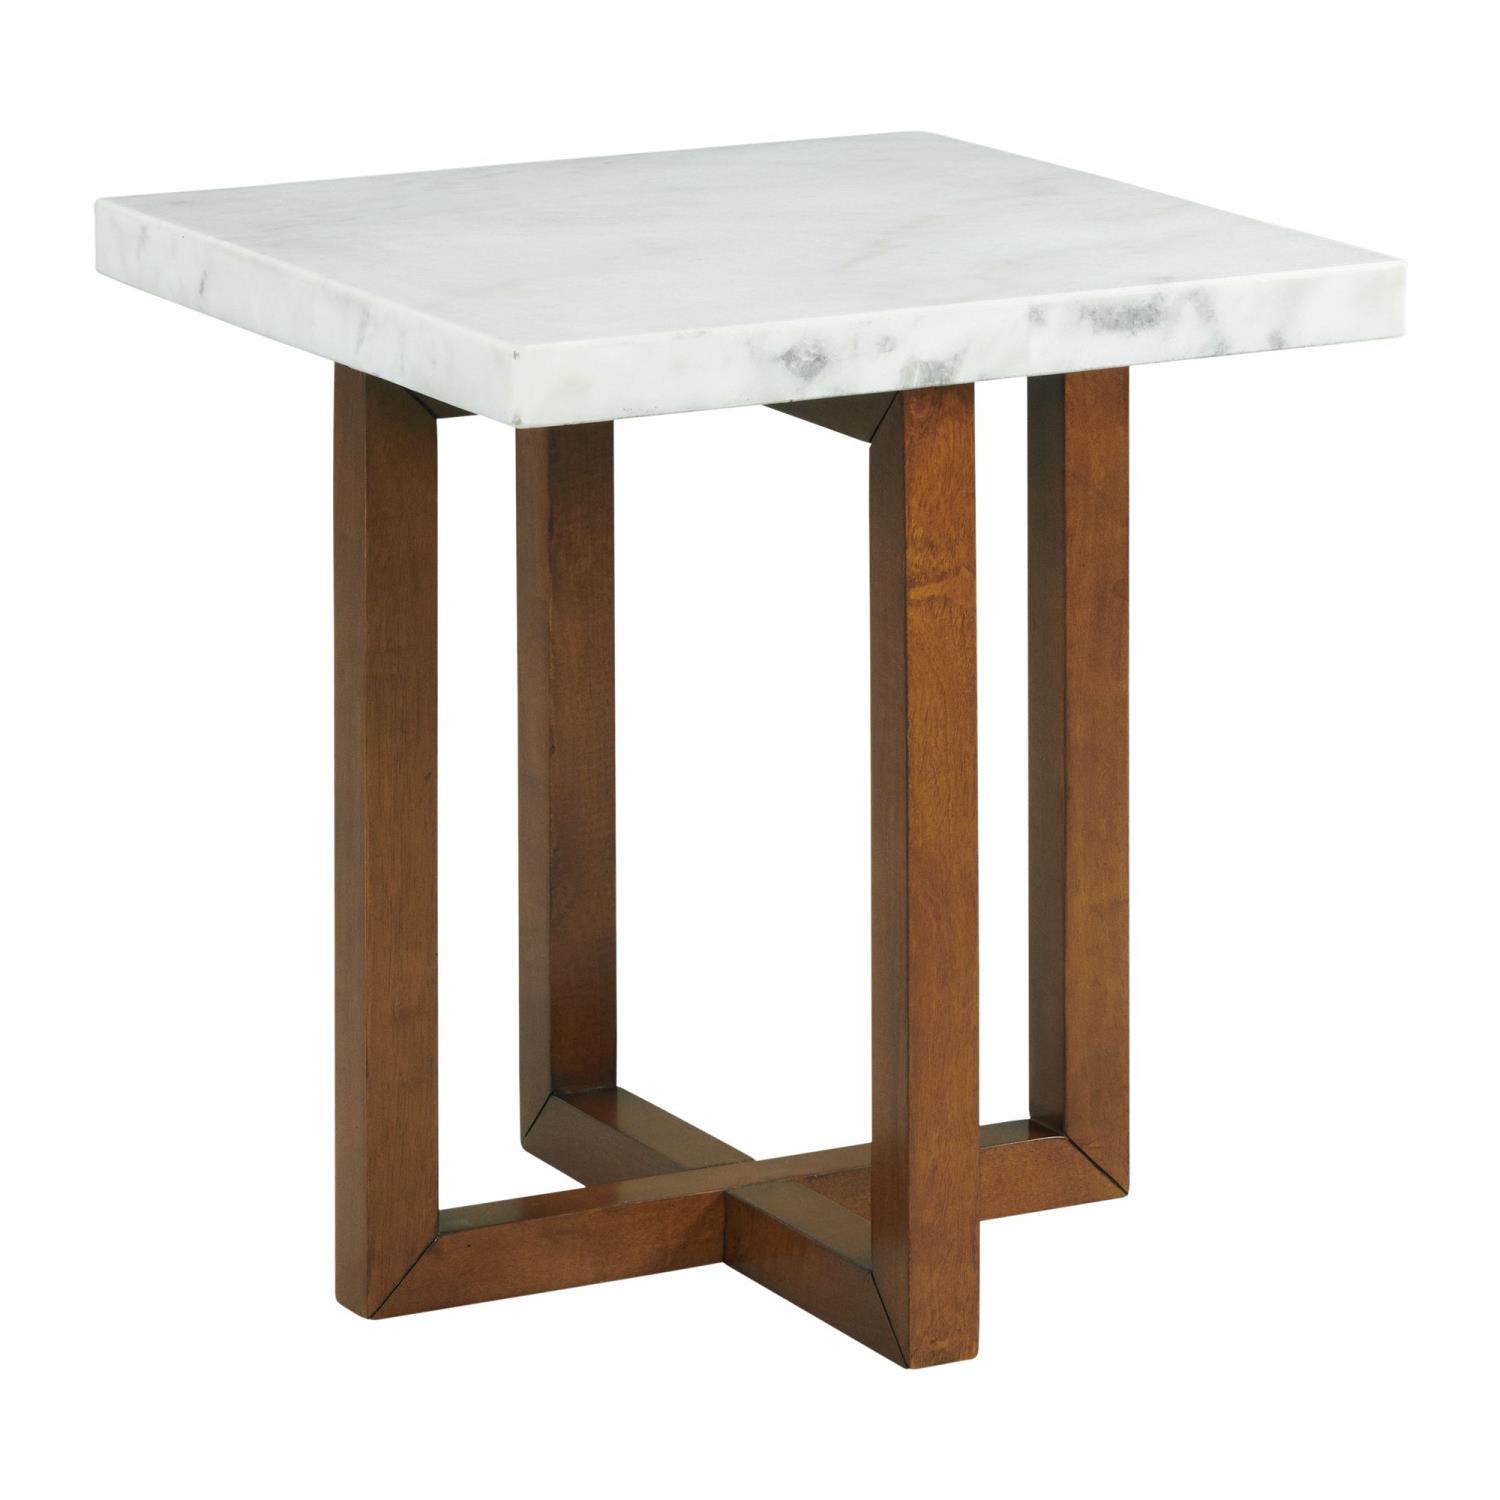 Elements Picket House Furnishings Meyers Marble Square End Table in White CTMS100ETE